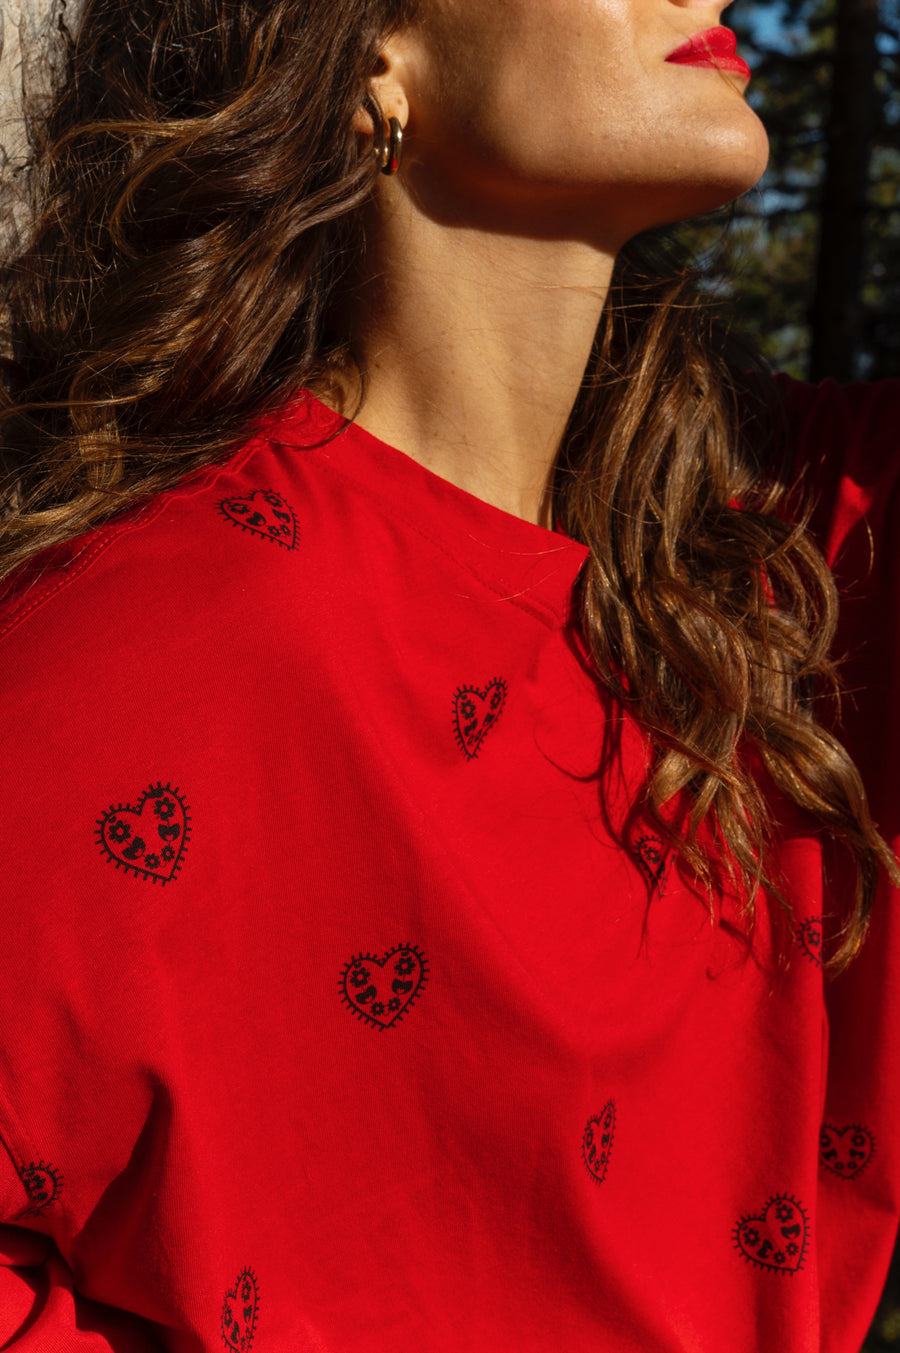 Whitney T-Shirt (Hearts pattern red)